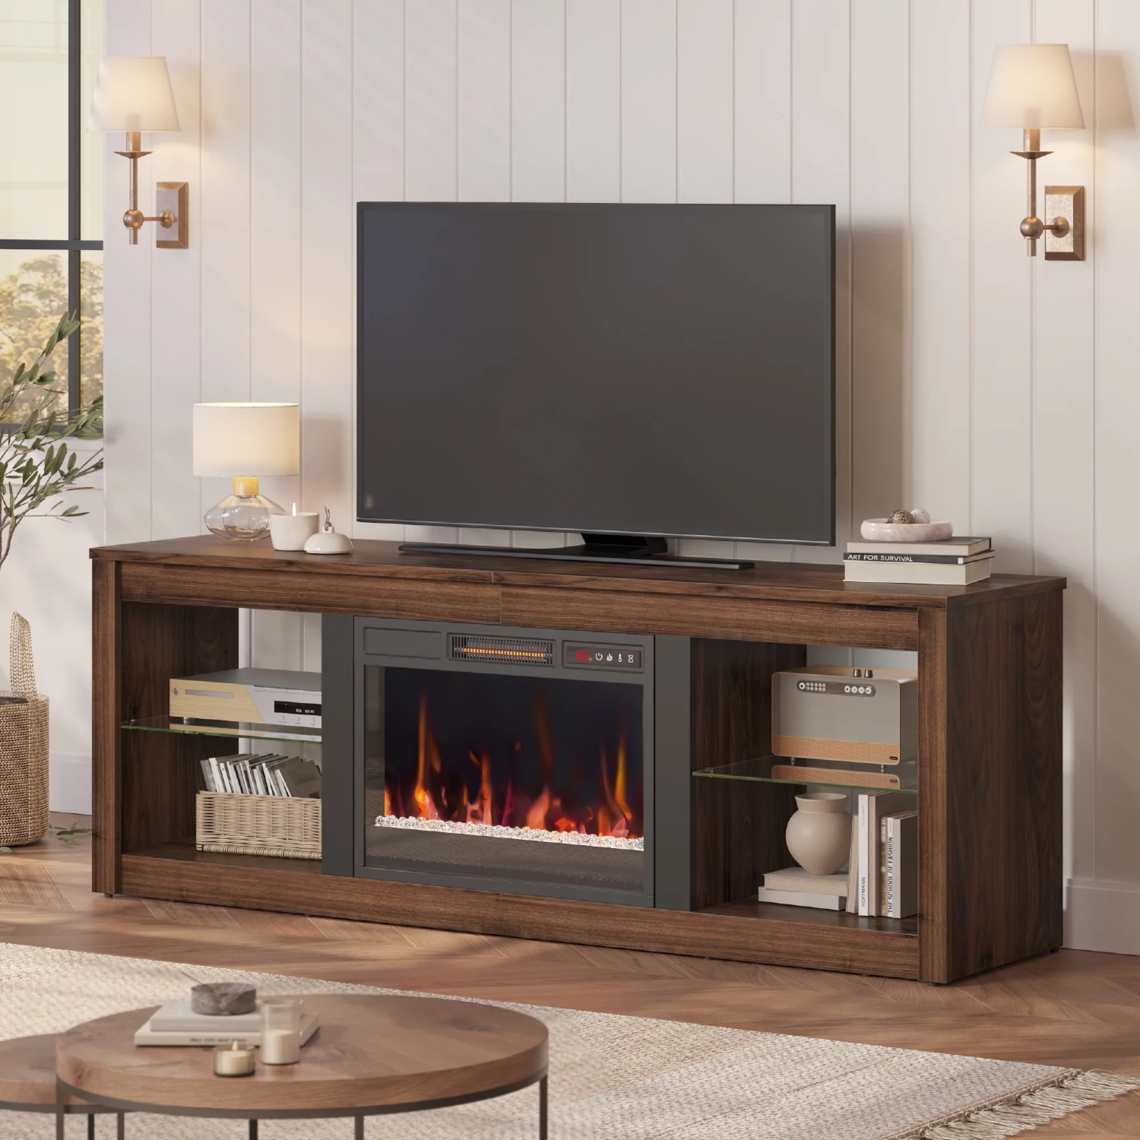 Bestier Modern Electric 7 Color LED Fireplace TV Stand for TVs up to 70" $220 + FS